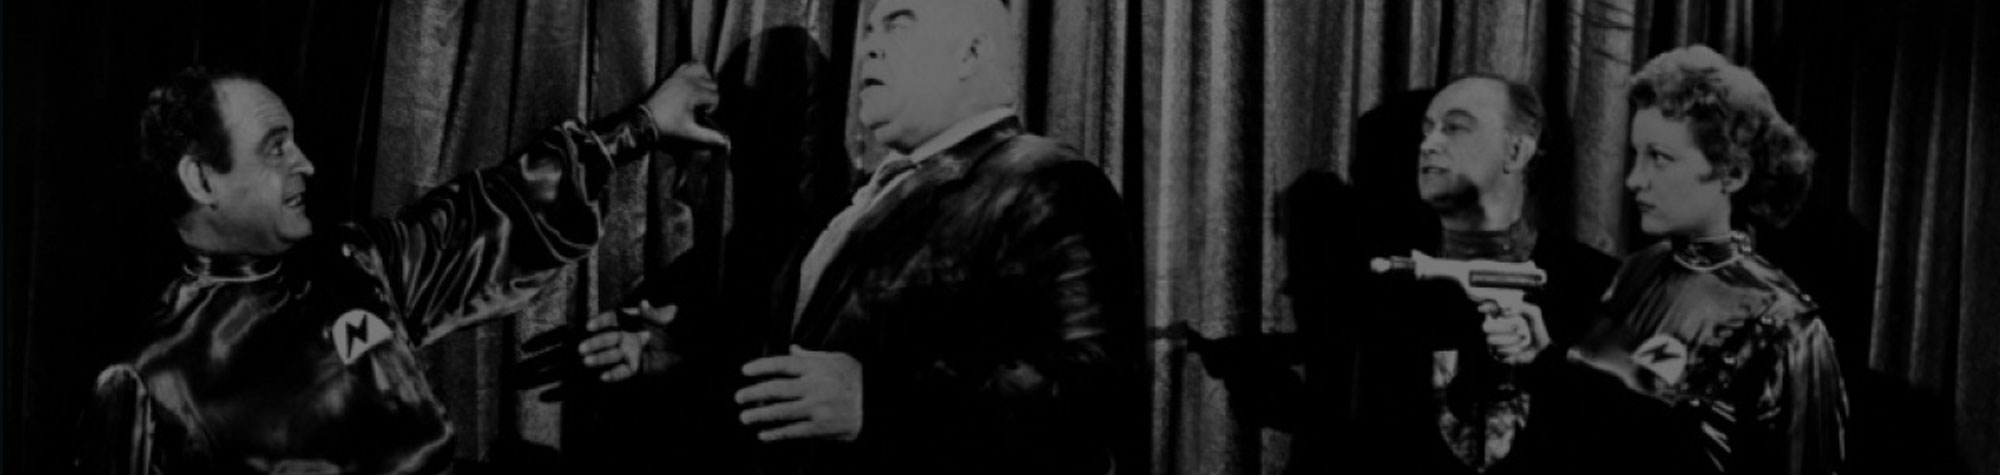 Theater: The Life and Works of Ed Wood